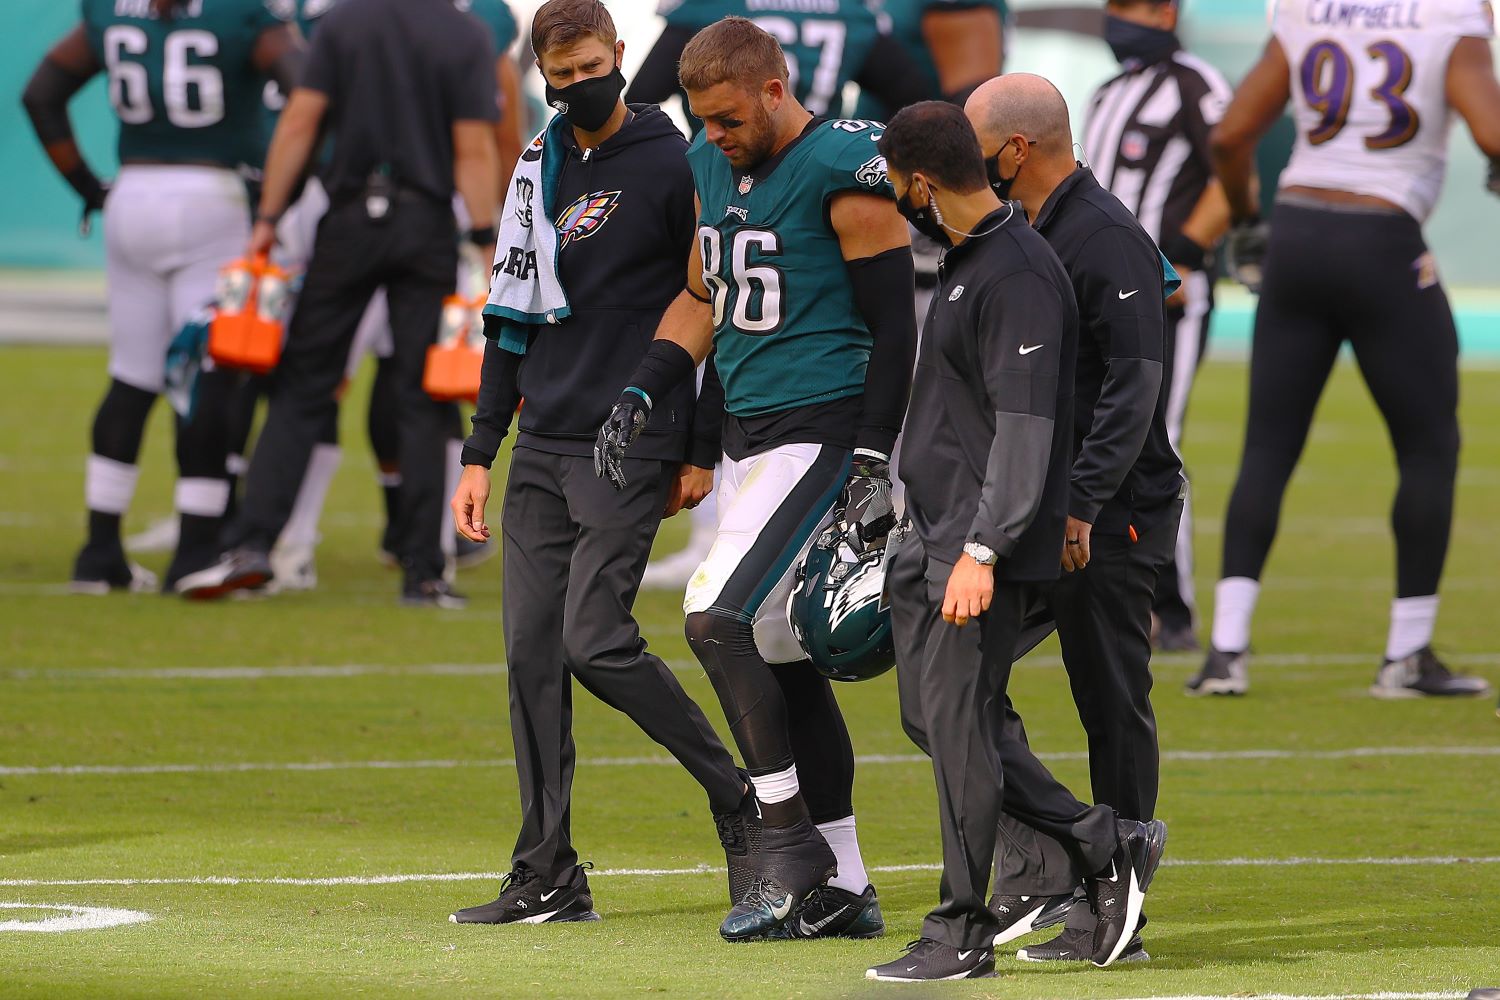 With Zach Ertz out for three to four weeks with an ankle injury, the Philadelphia Eagles just suffered a massive blow to their offense.